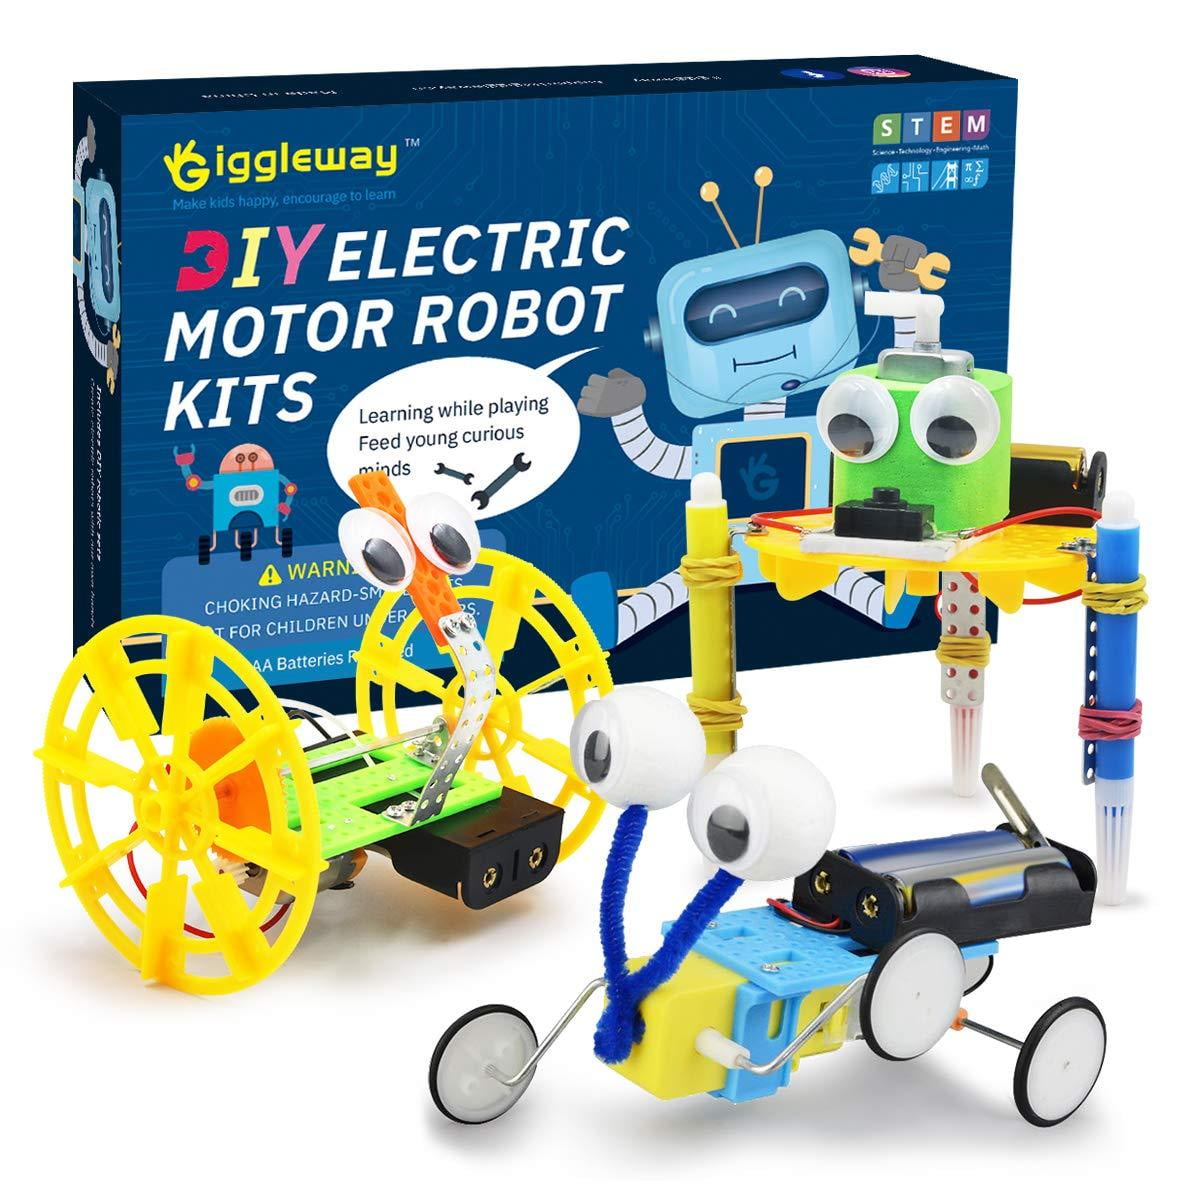 Water Cooler Kits Kids Education Experiment Maker Technology Invention Toy Kits